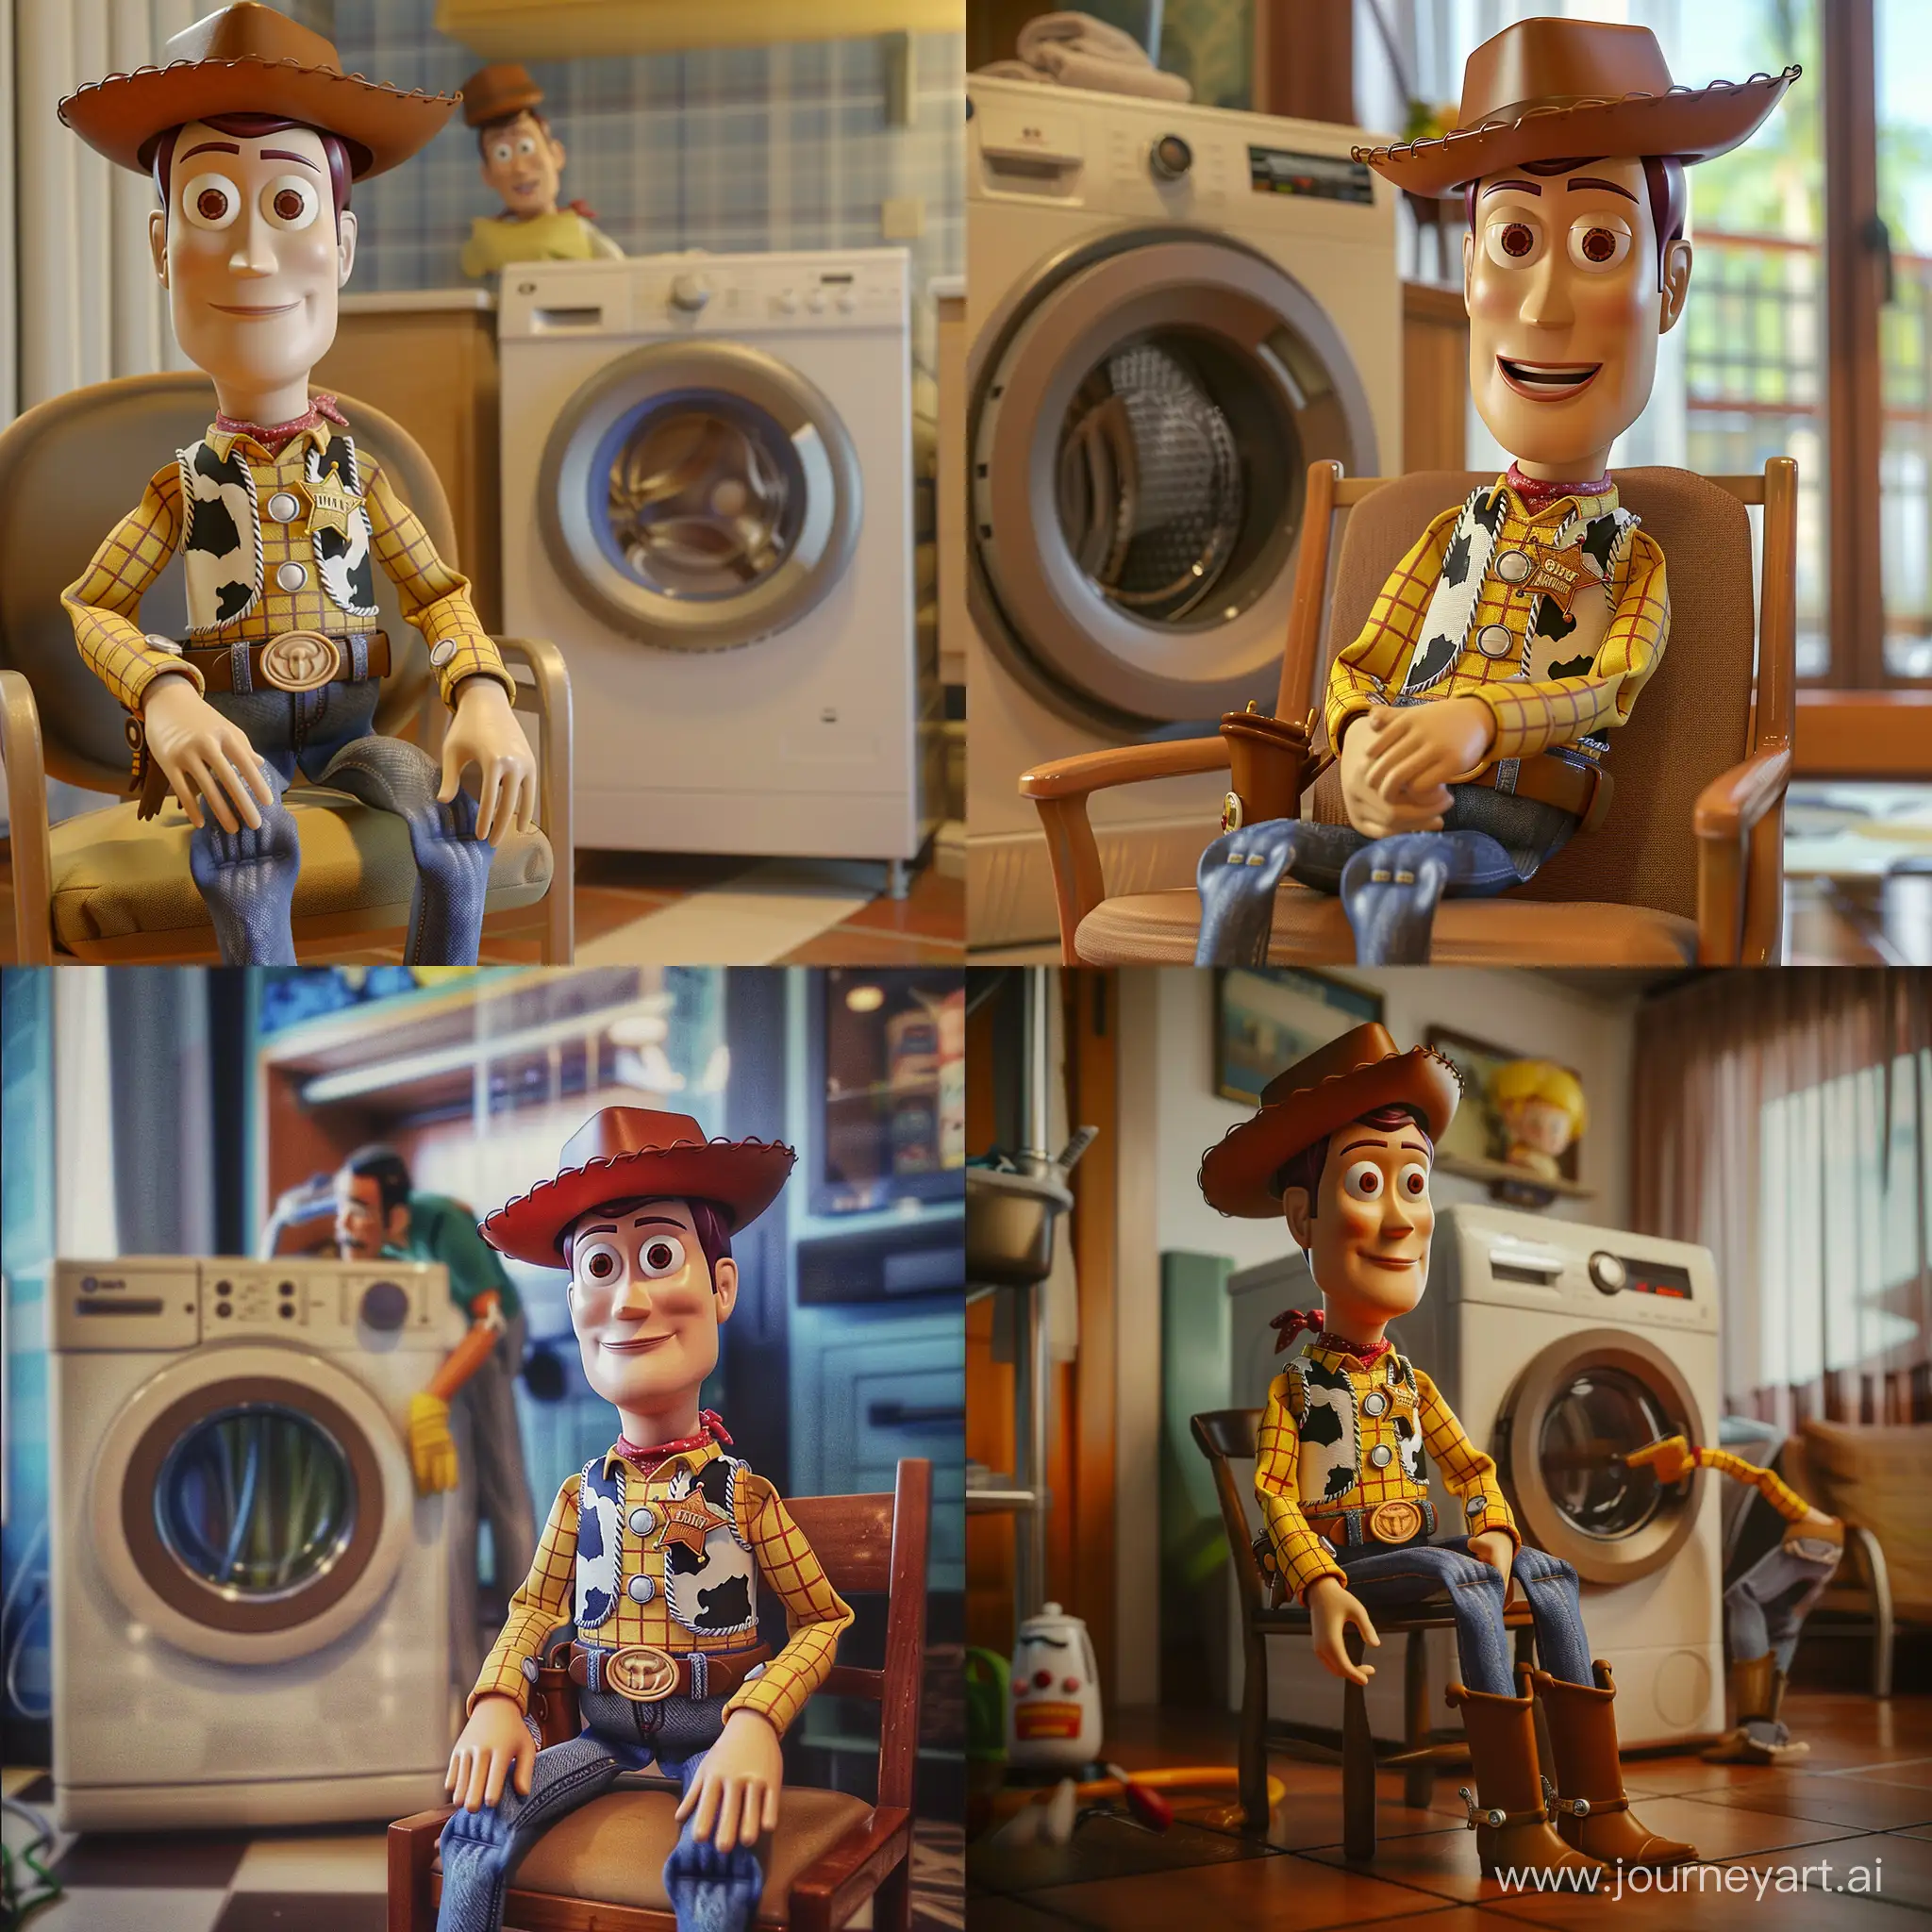 Woody-Toy-Story-Smiling-in-Hotel-Room-Waiting-for-Repairman